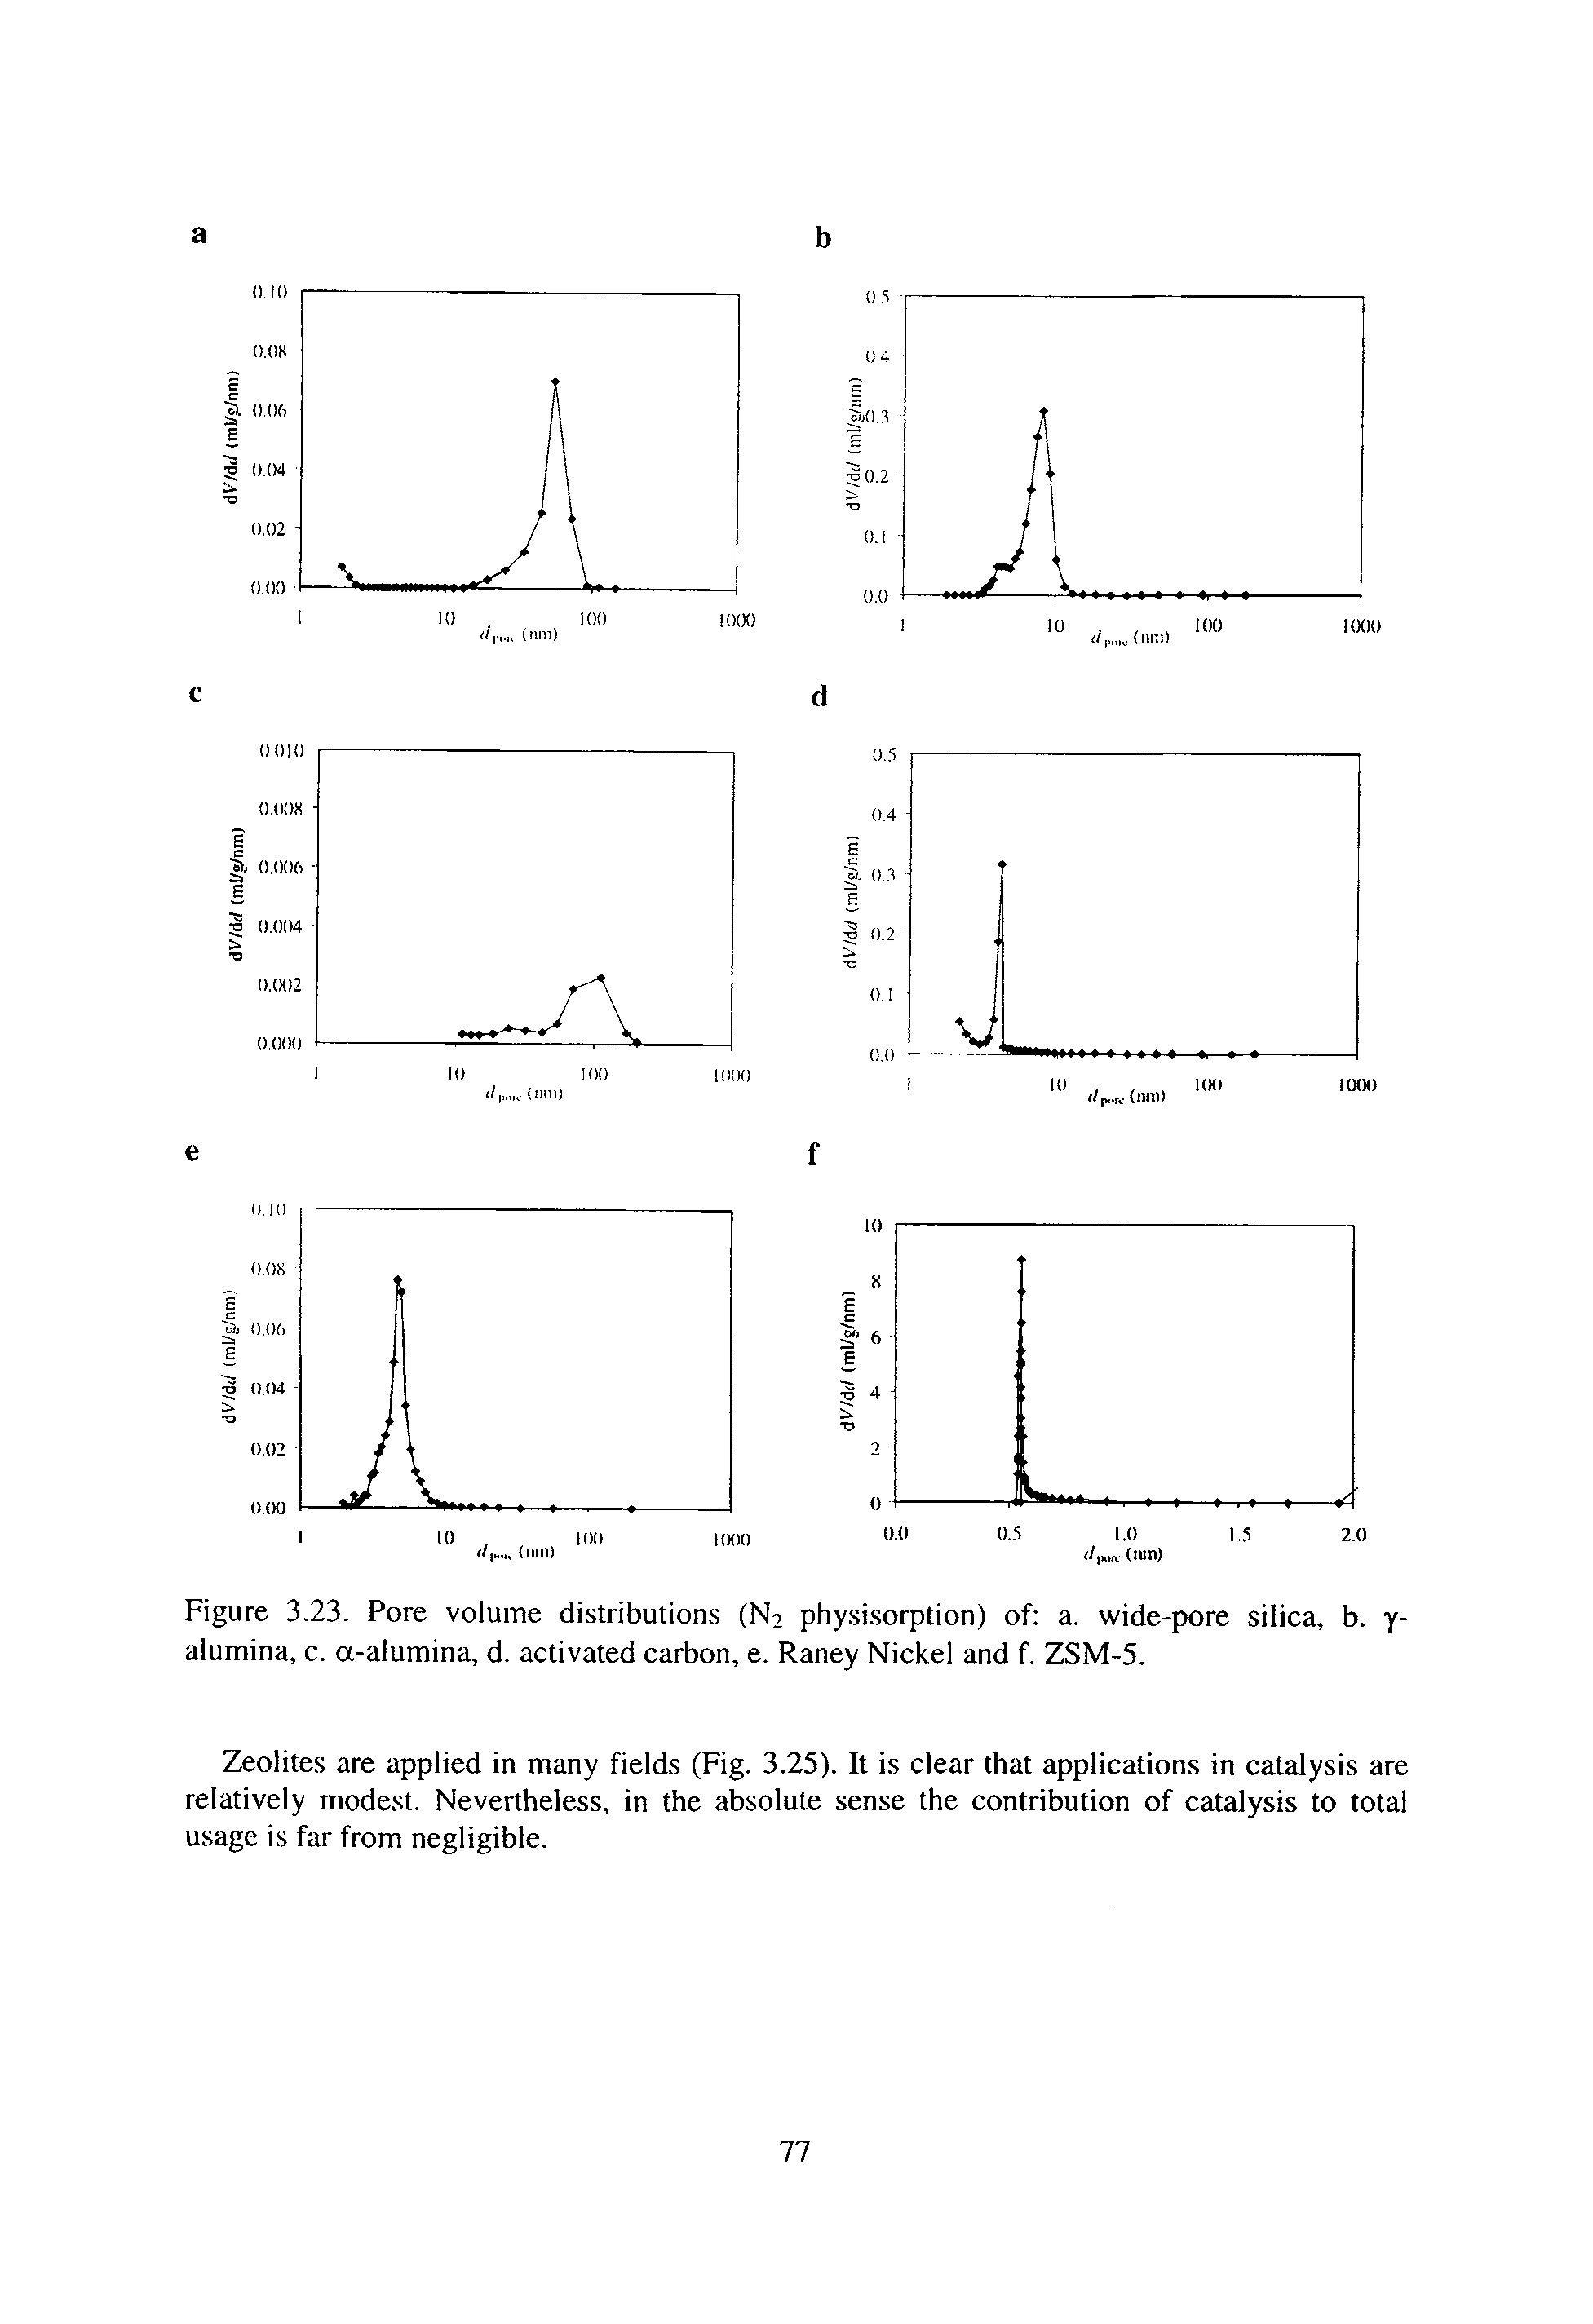 Figure 3.23. Pore volume distributions (Nt physi.sorption) of a. wide-pore silica, b. y-alumina, c. a-alumina, d. activated carbon, e. Raney Nickel and f. ZSM-5.